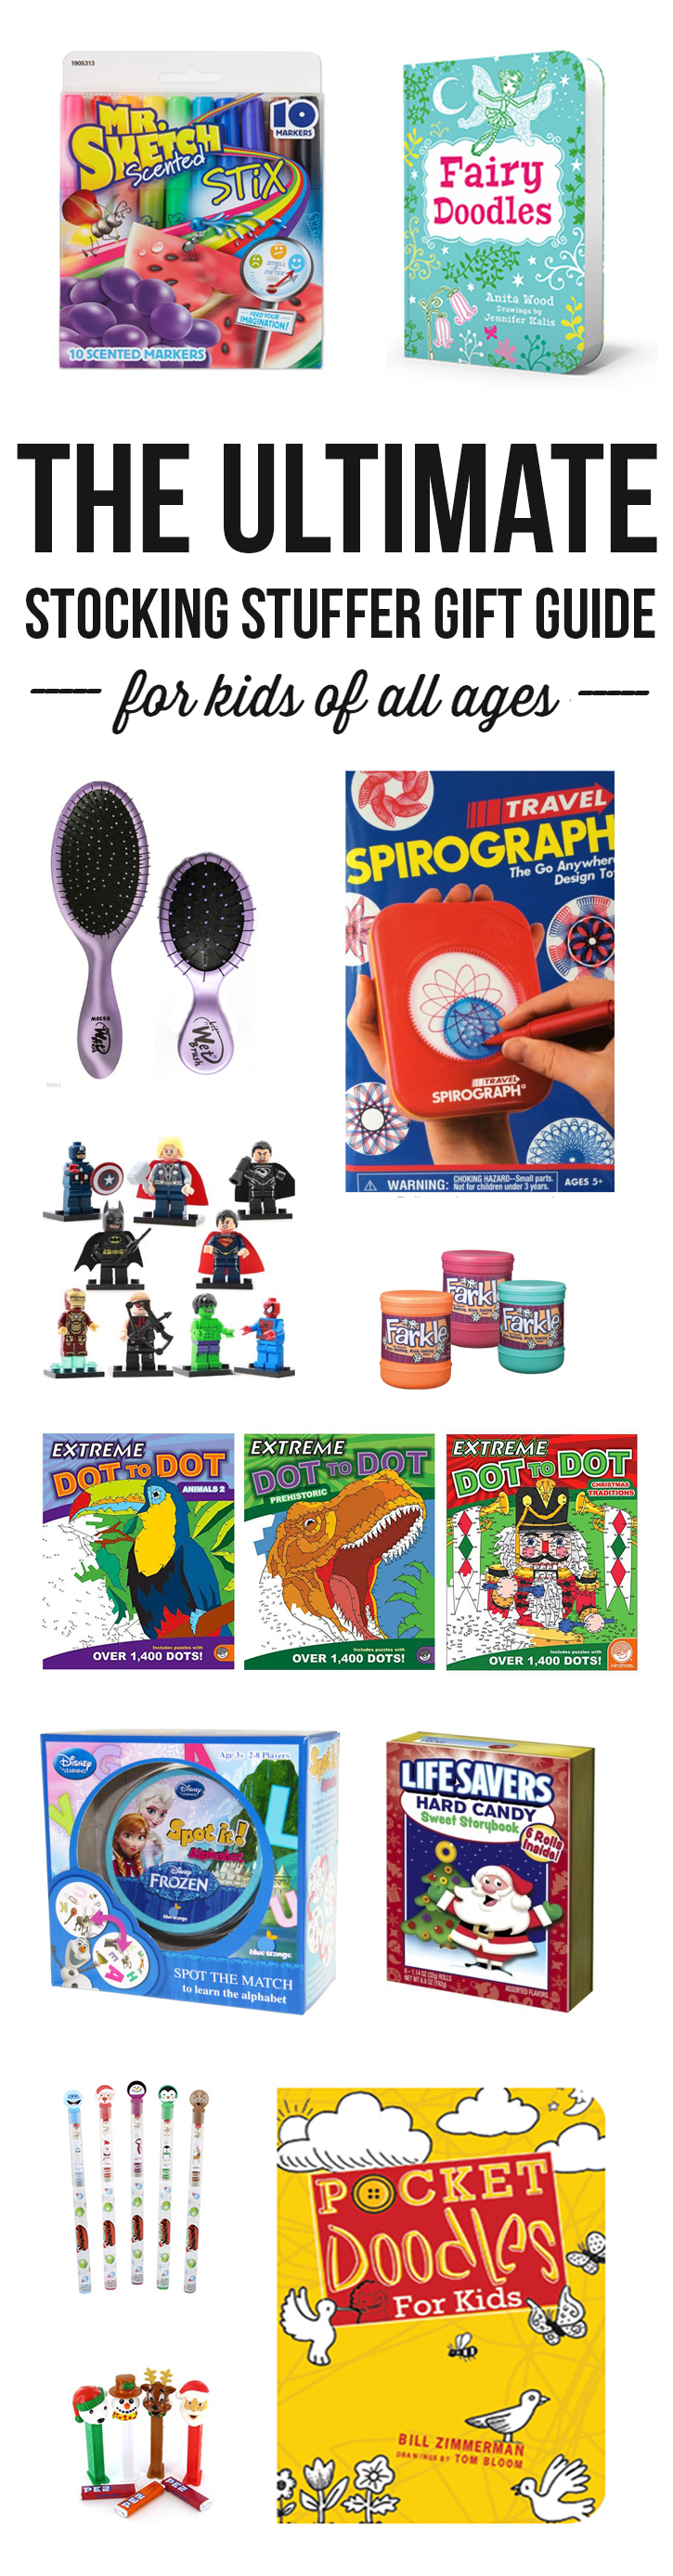 40+ unique and memorable stocking stuffer ideas for kids of all ages!